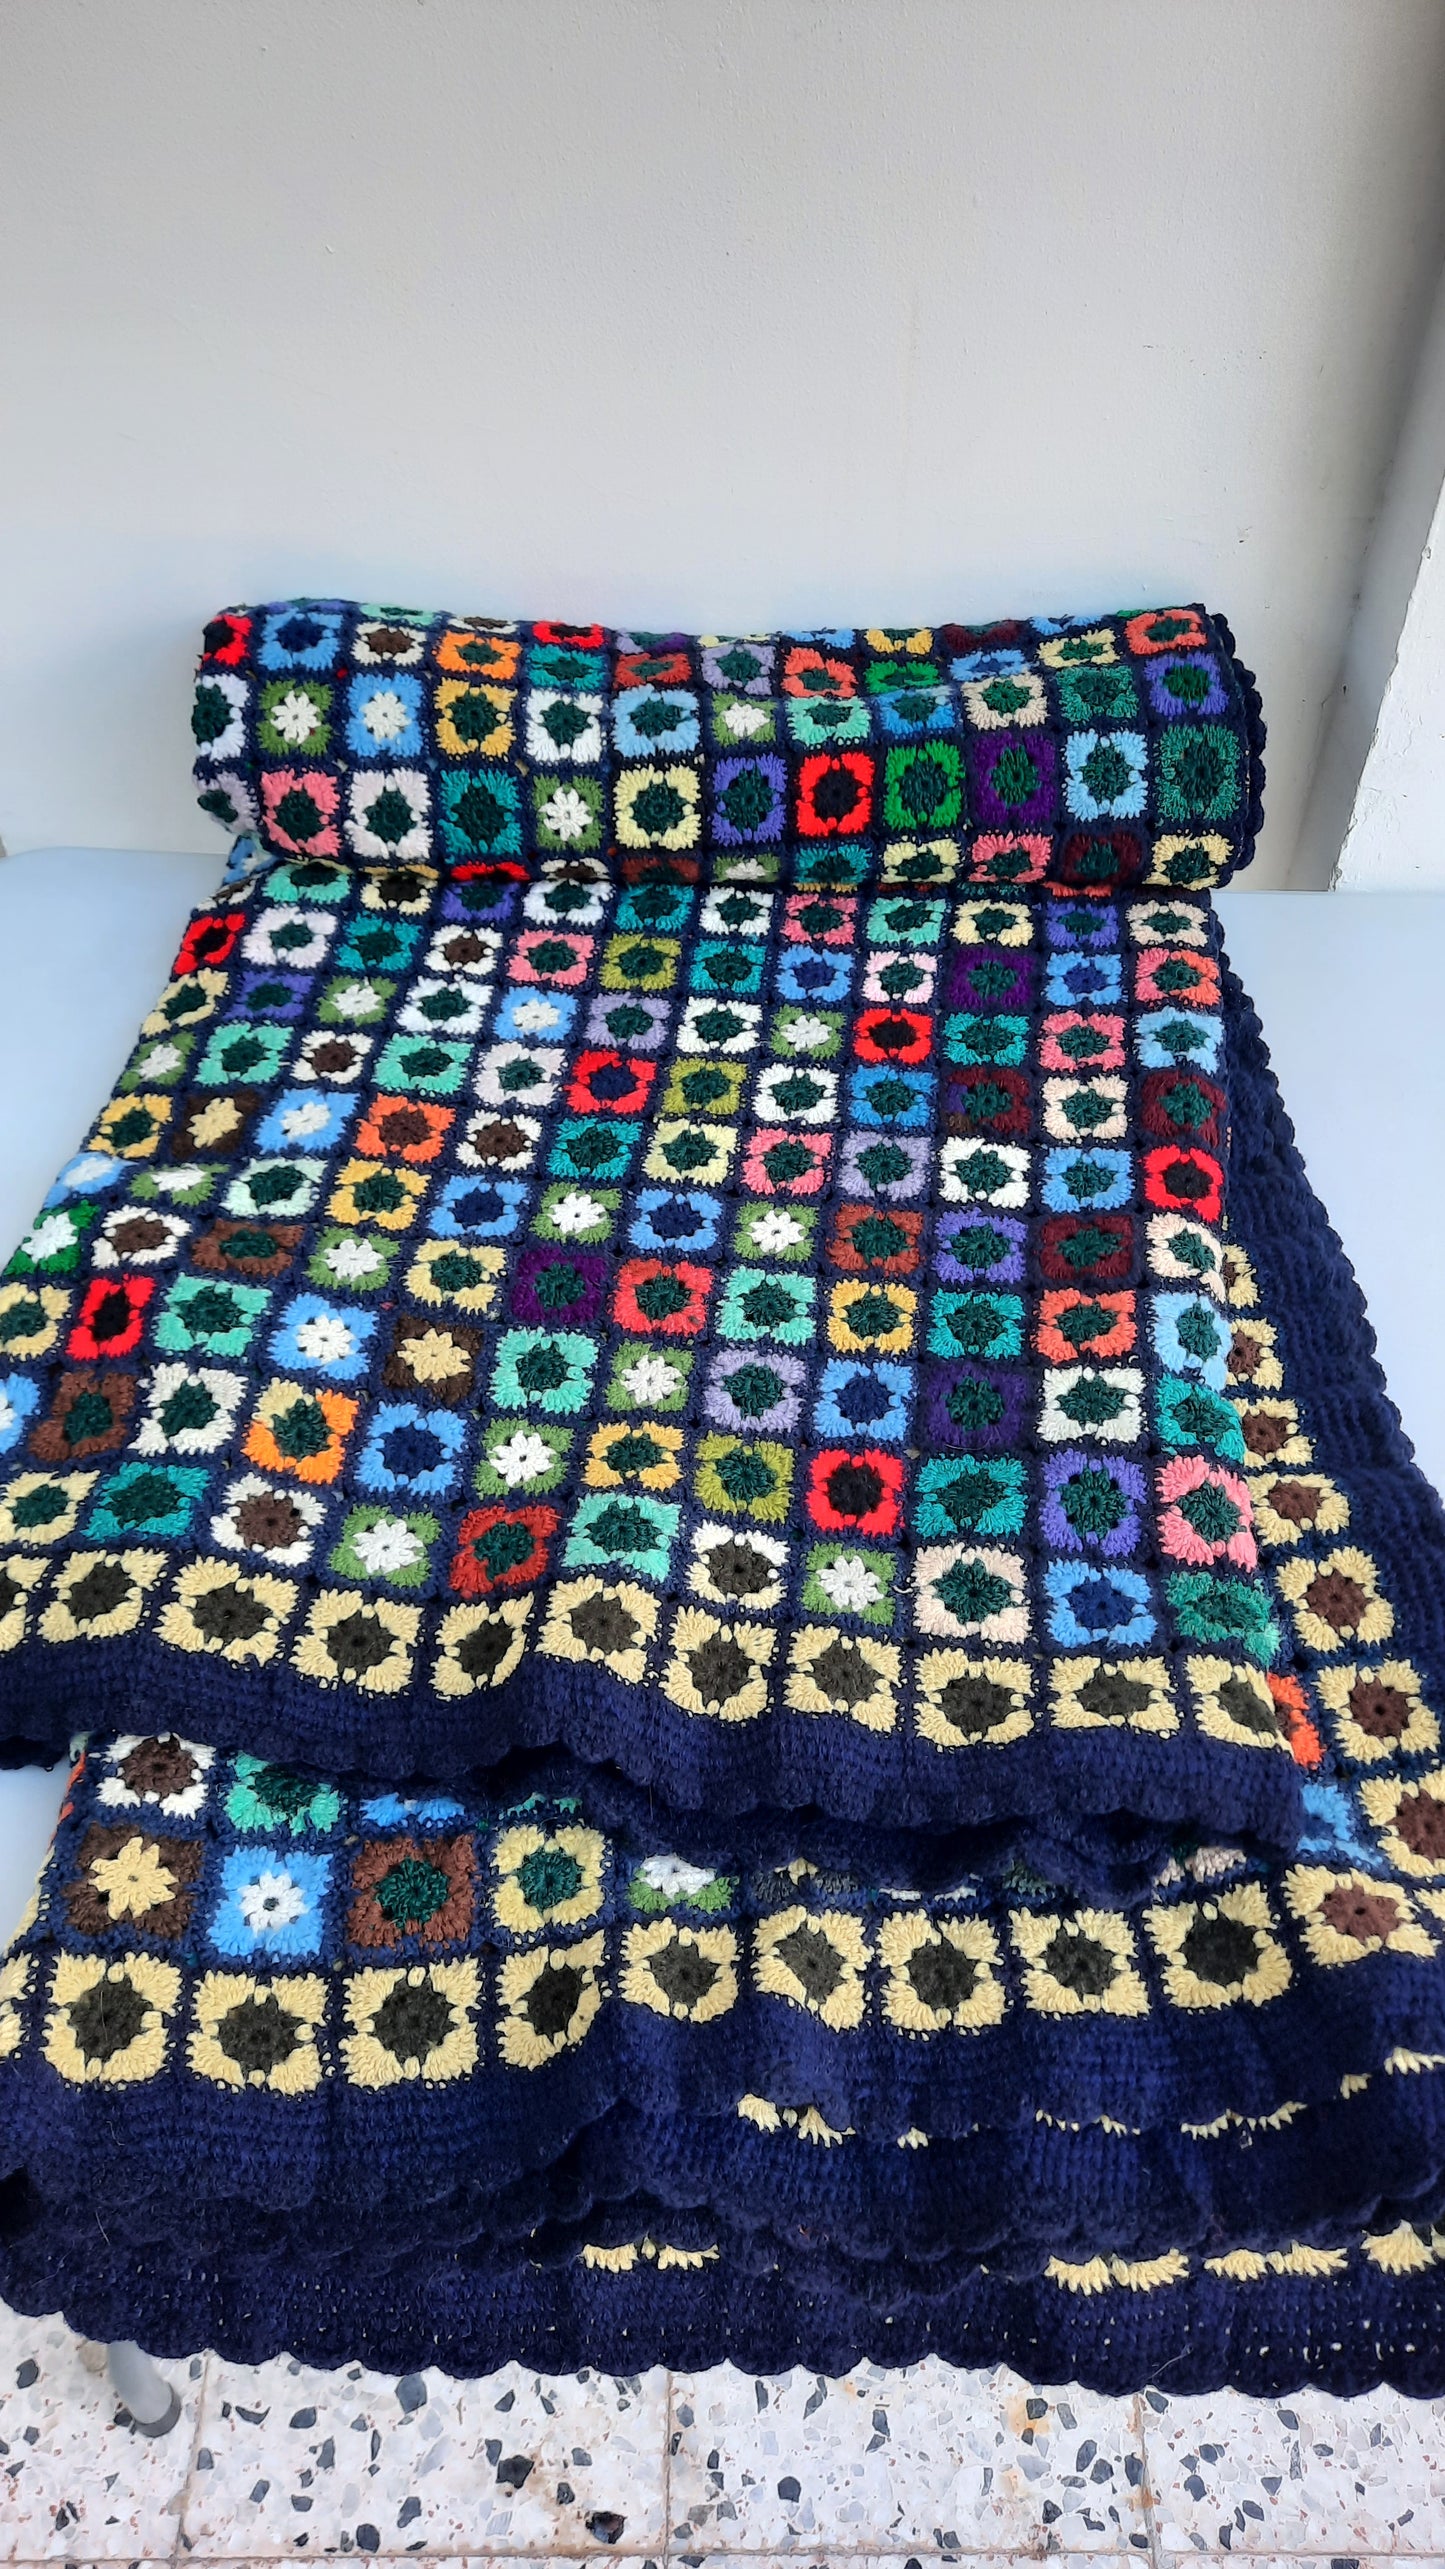 Vintage XL King Size Crochet Afghan Bed Cover